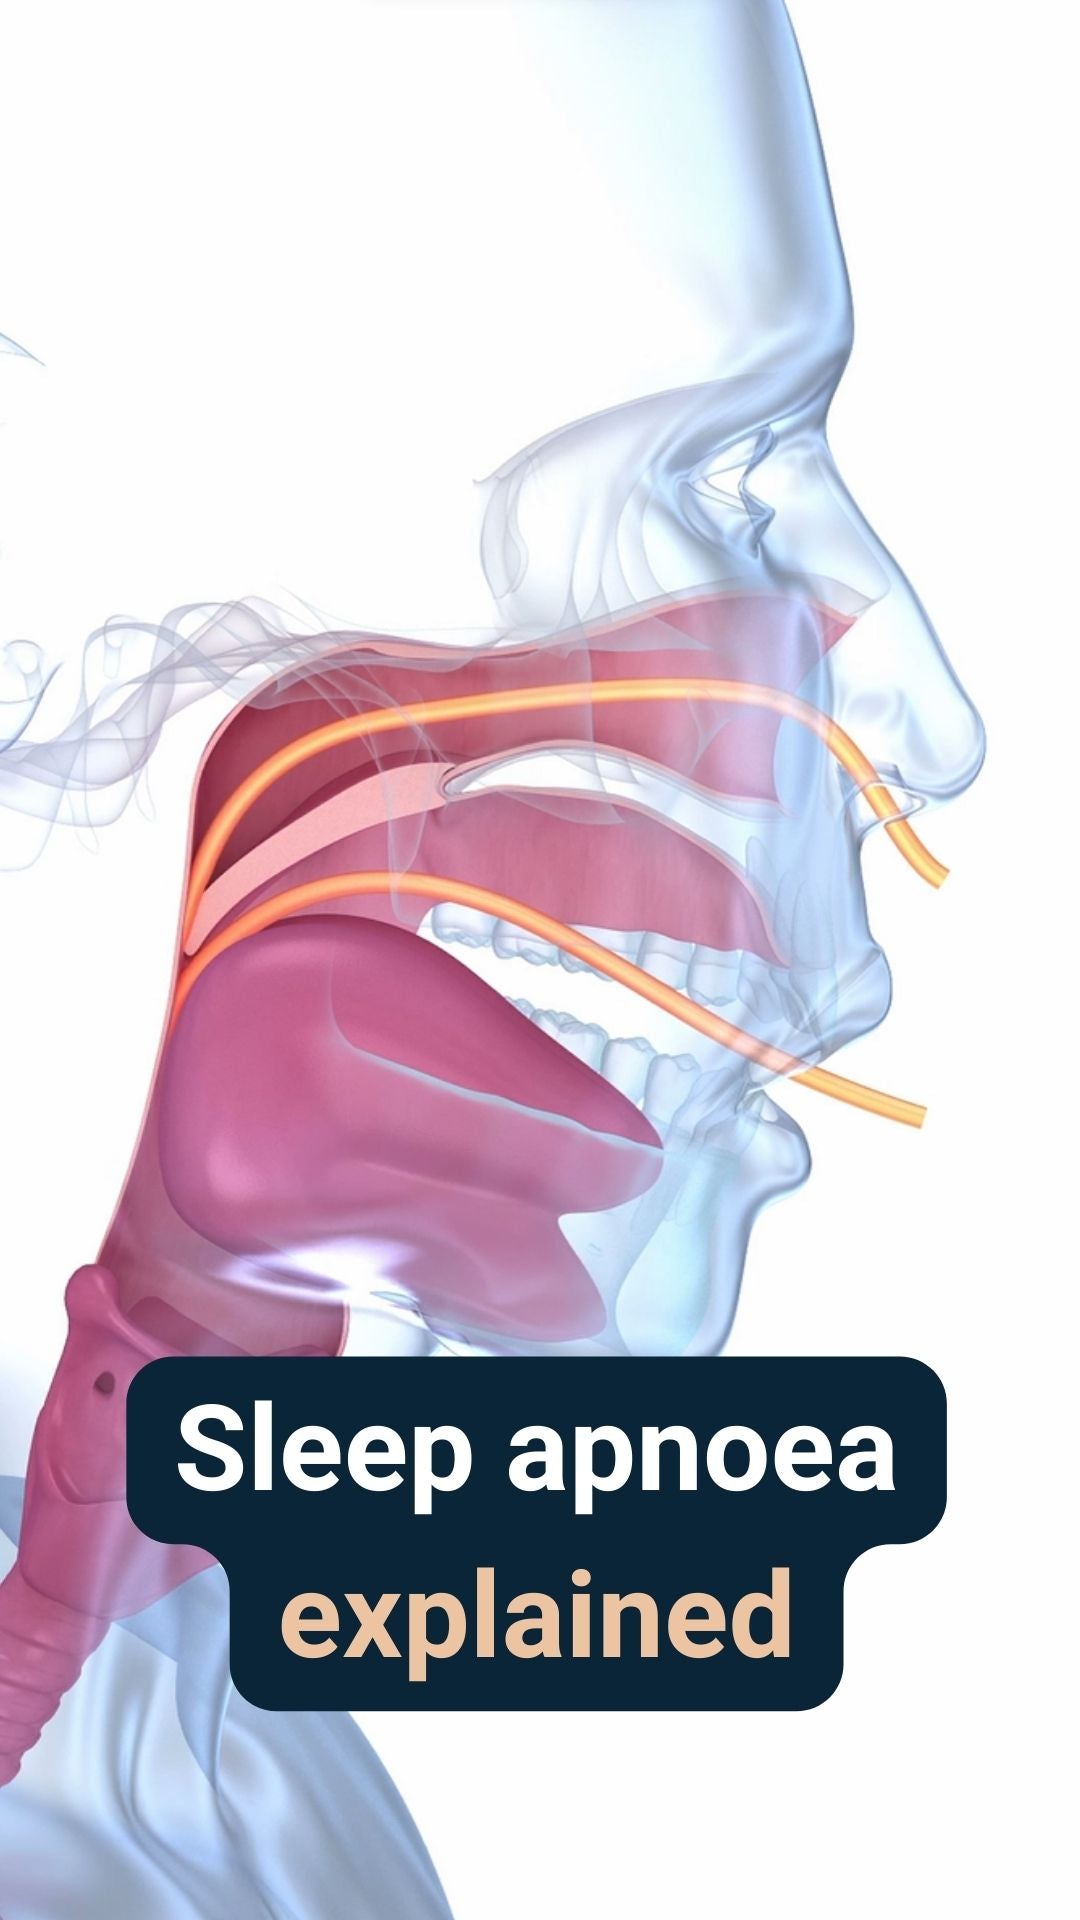 An illustrated diagram of the airways in the human head, with the caption 'Sleep apnoea explained'